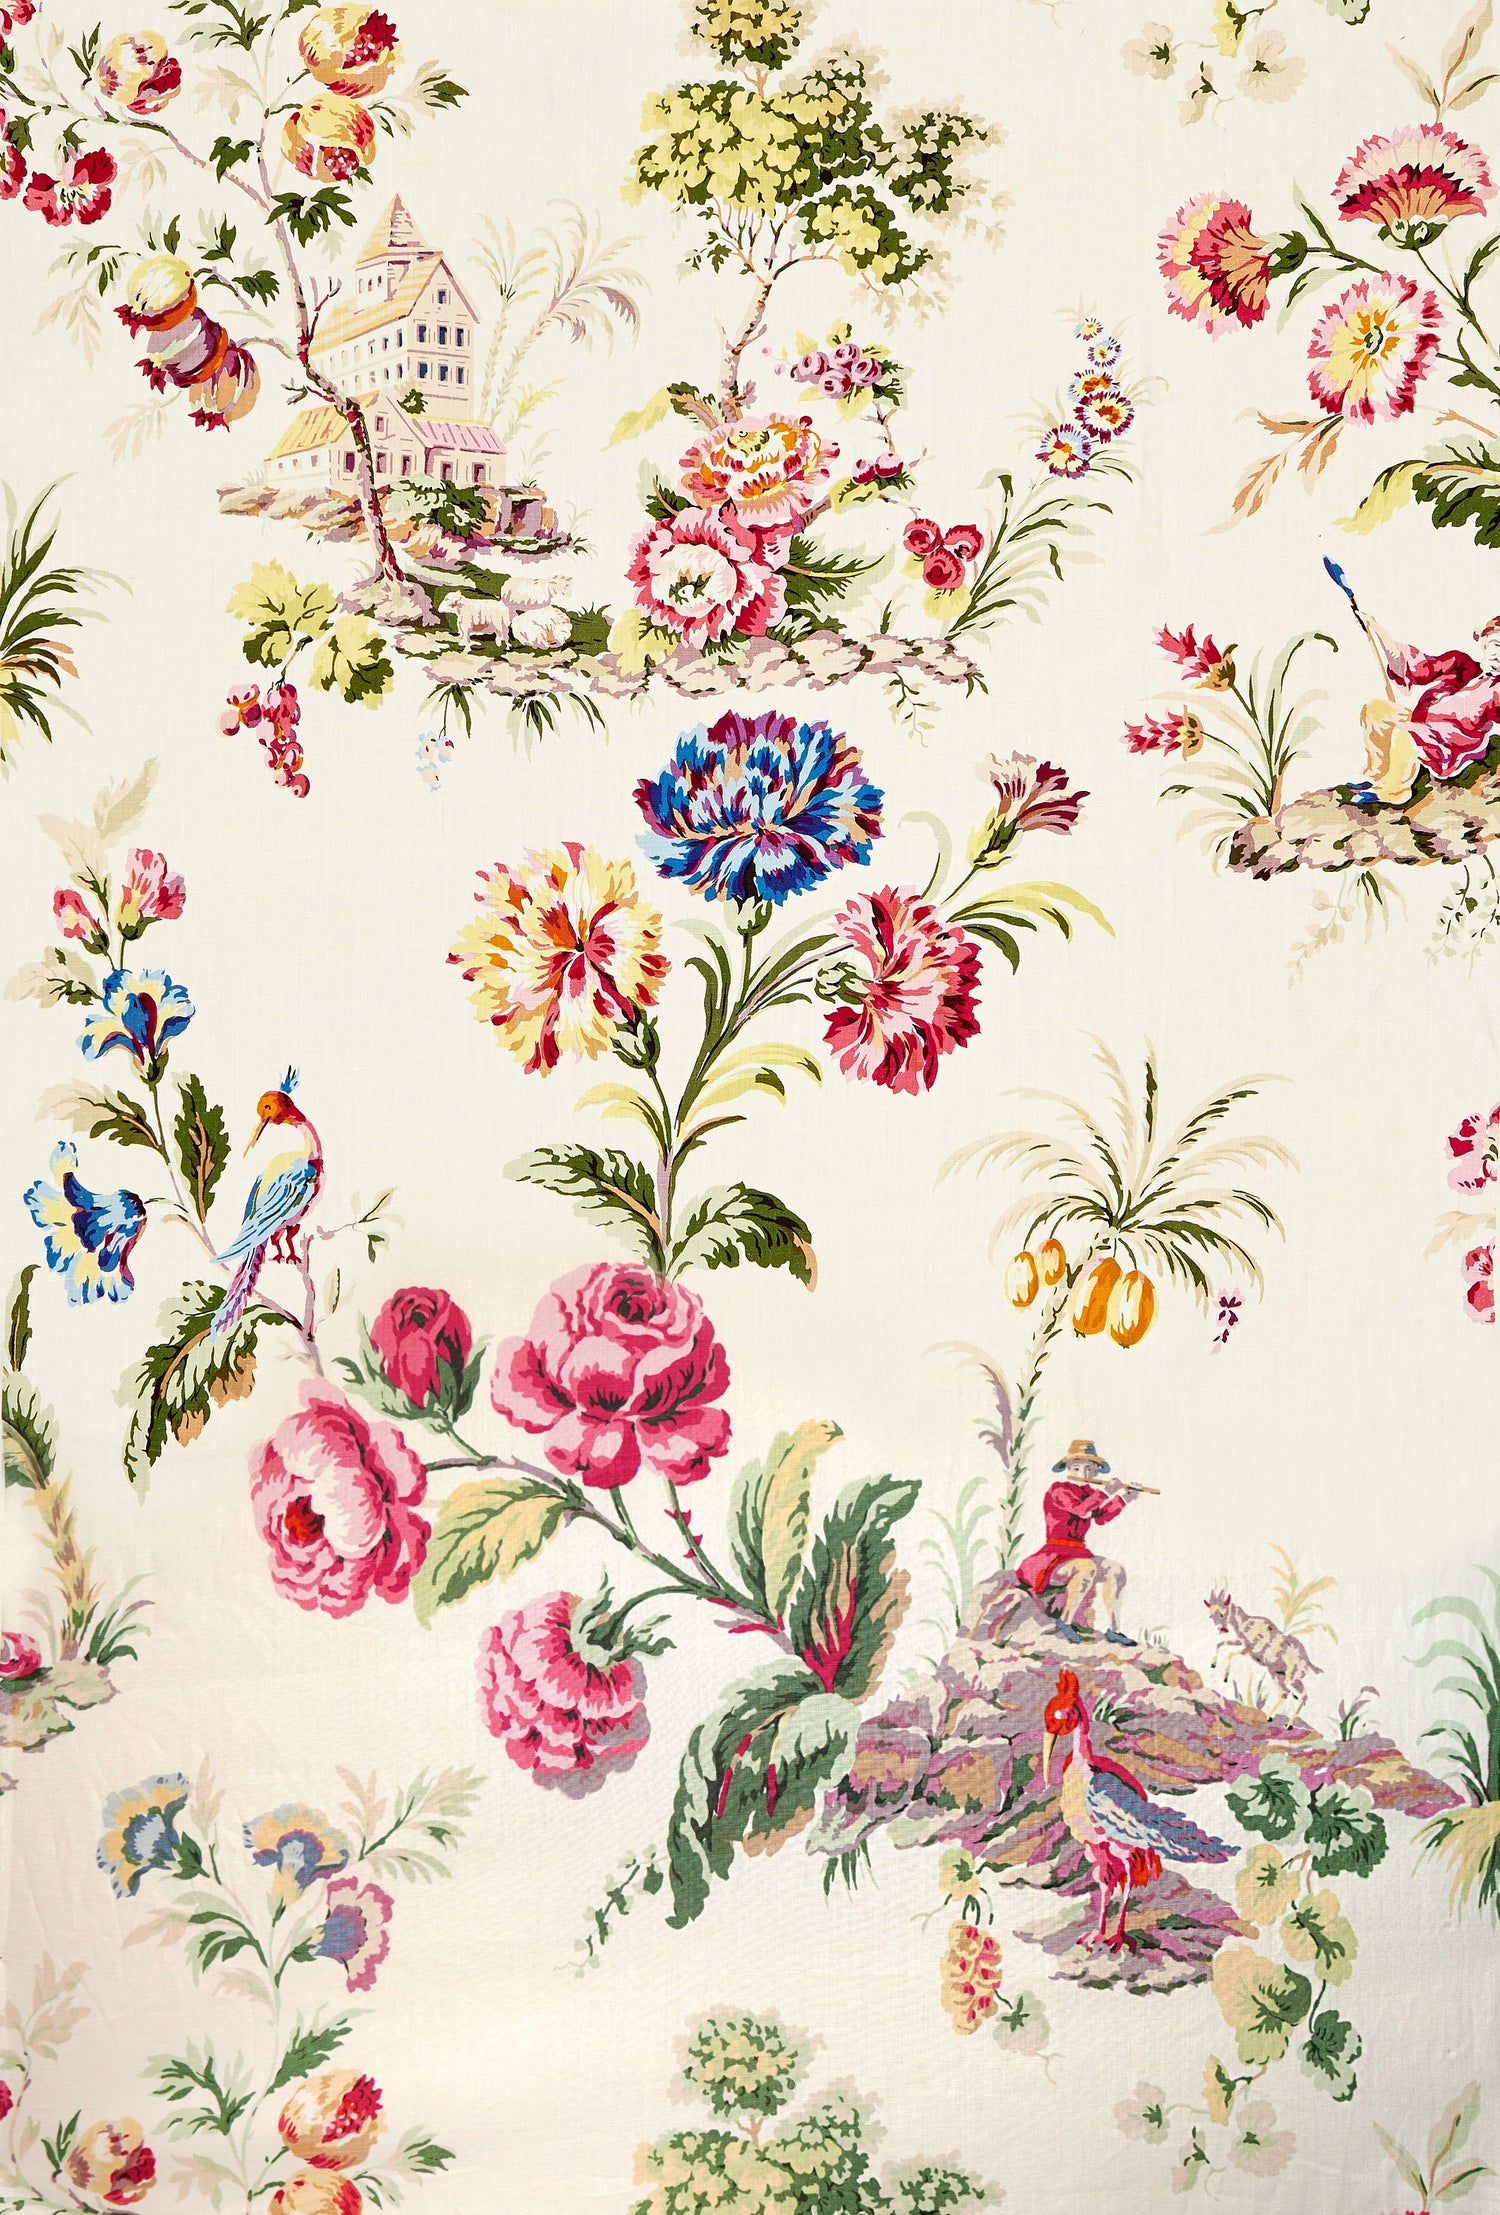 Somerset Linen Print fabric in bloom color - pattern number SC 000116584 - by Scalamandre in the Scalamandre Fabrics Book 1 collection